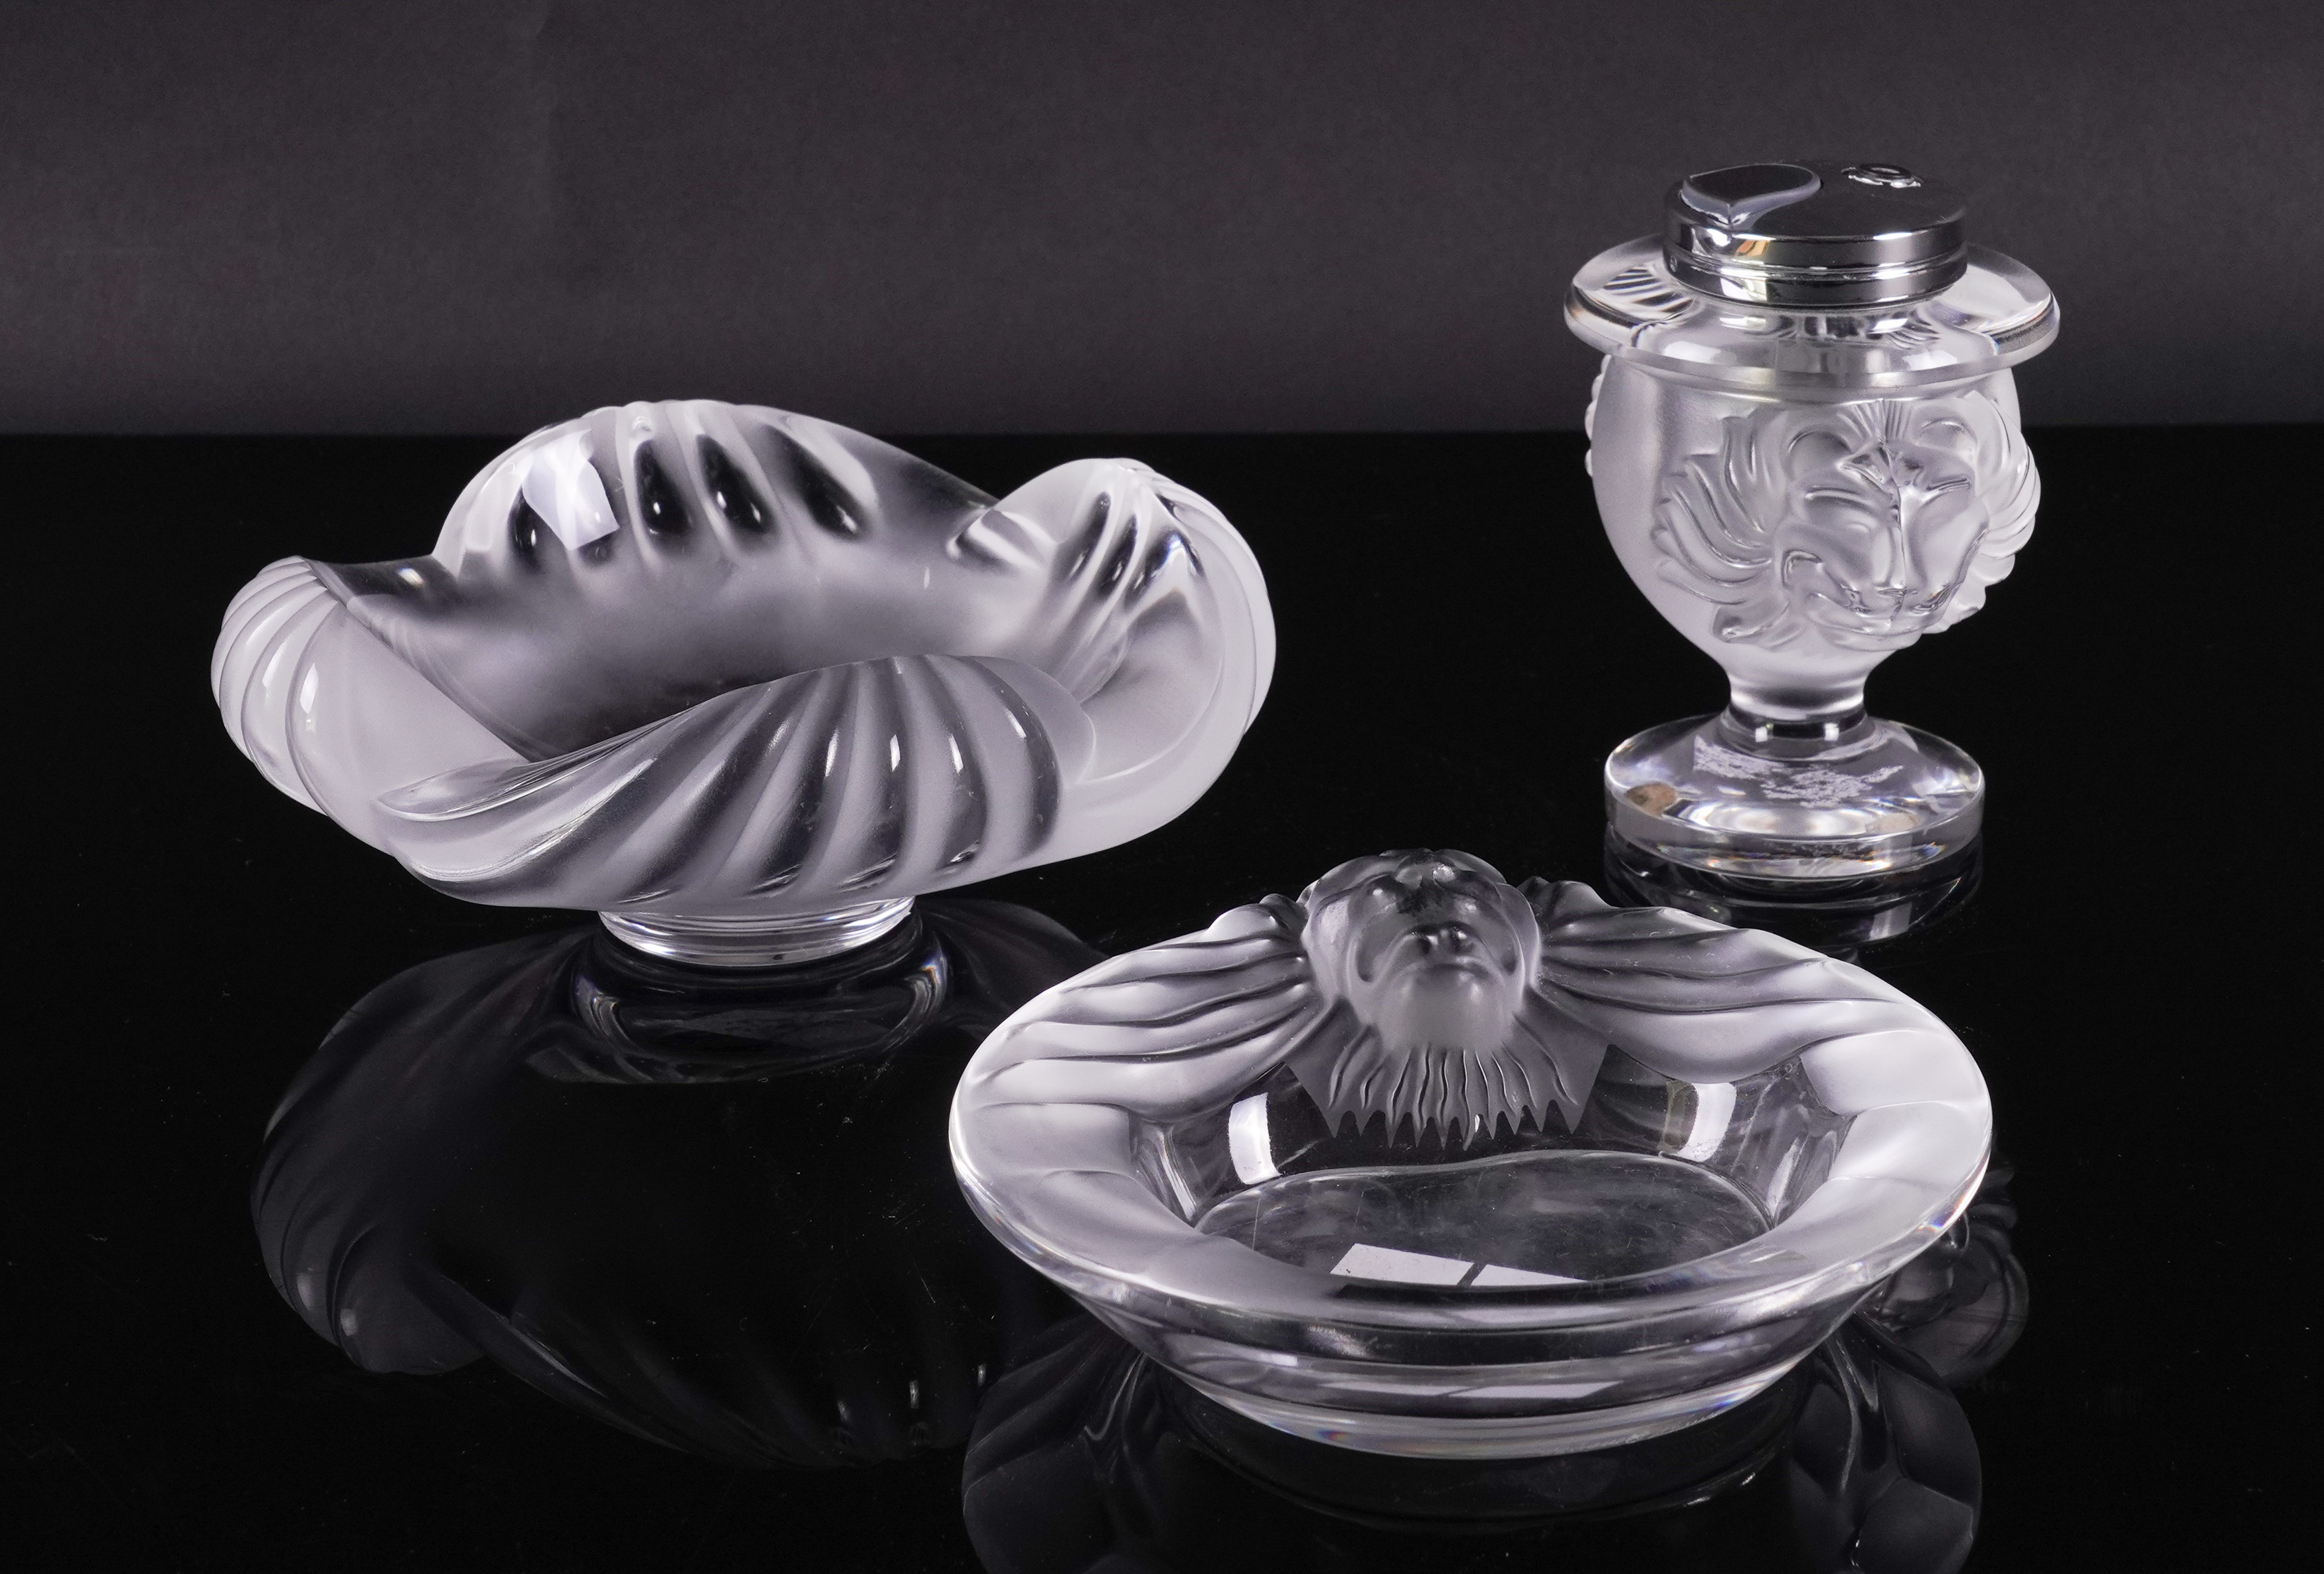 A LALIQUE `TETE DE LION' CLEAR AND FROSTED GLASS TABLE LIGHTER AND ASHTRAY (3)